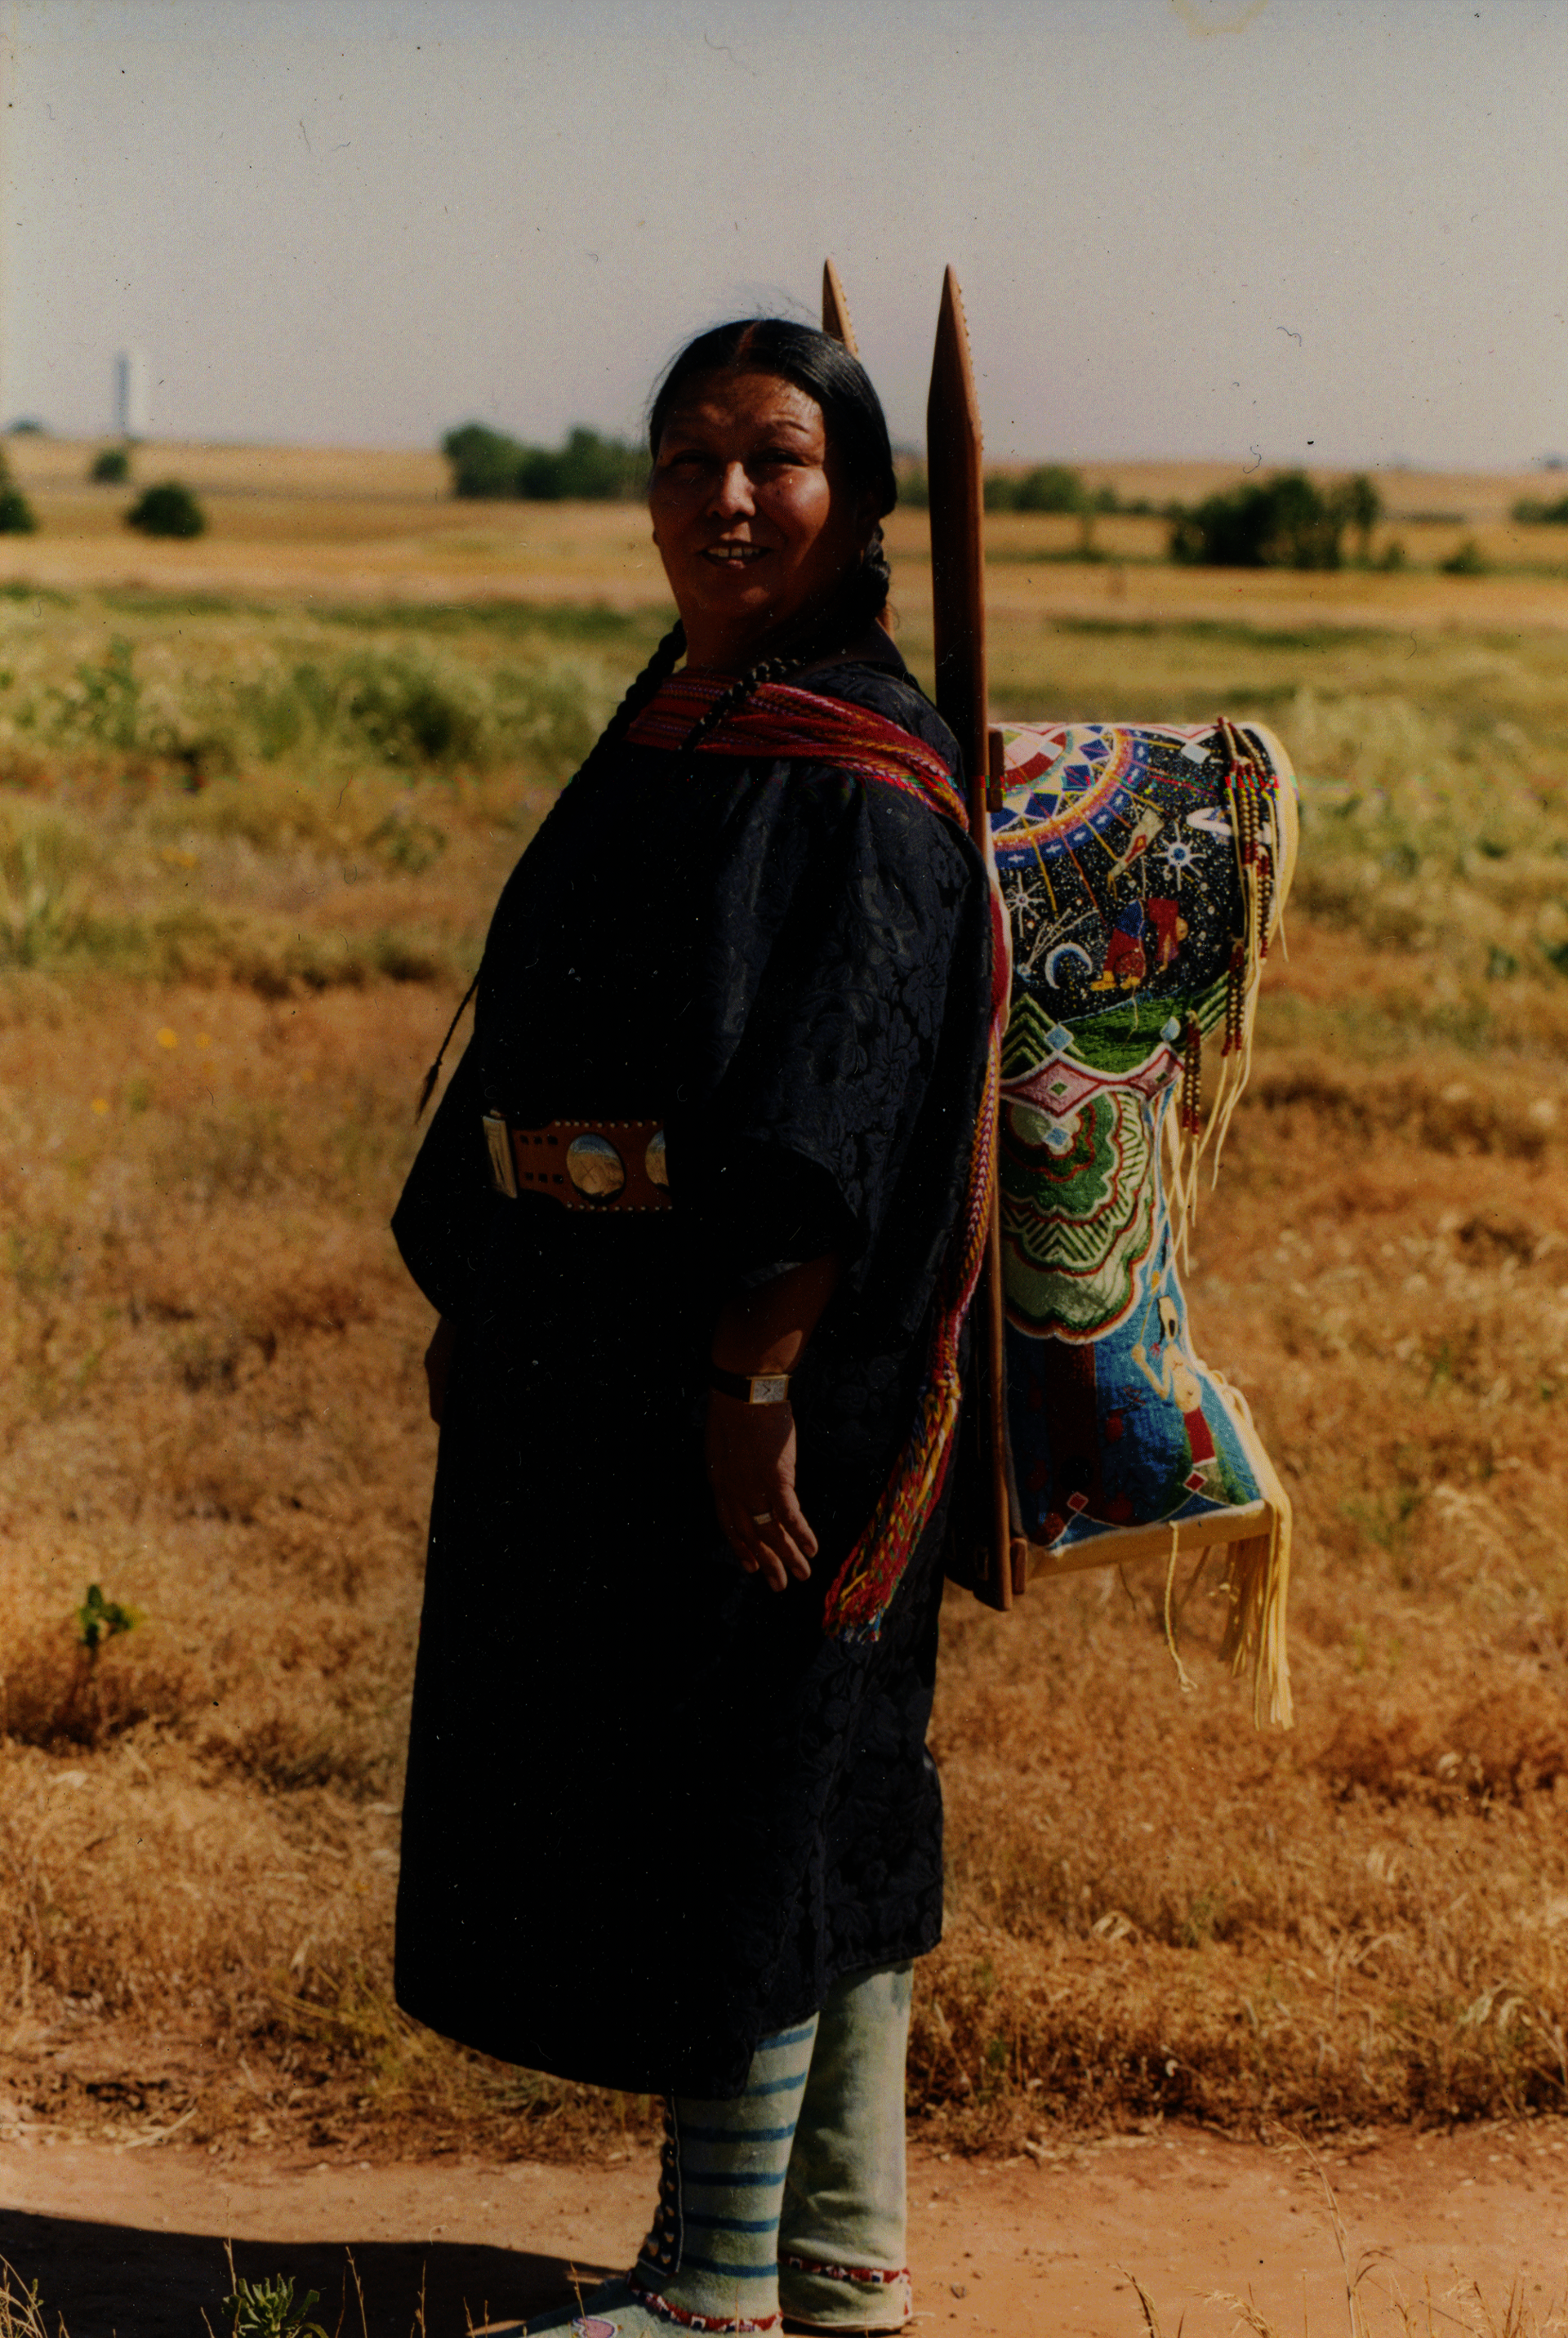 Brown-skinned woman wearing a colorful baby carrier strapped to her back. Her hair is braided and she wears a dark dress and striped socks.